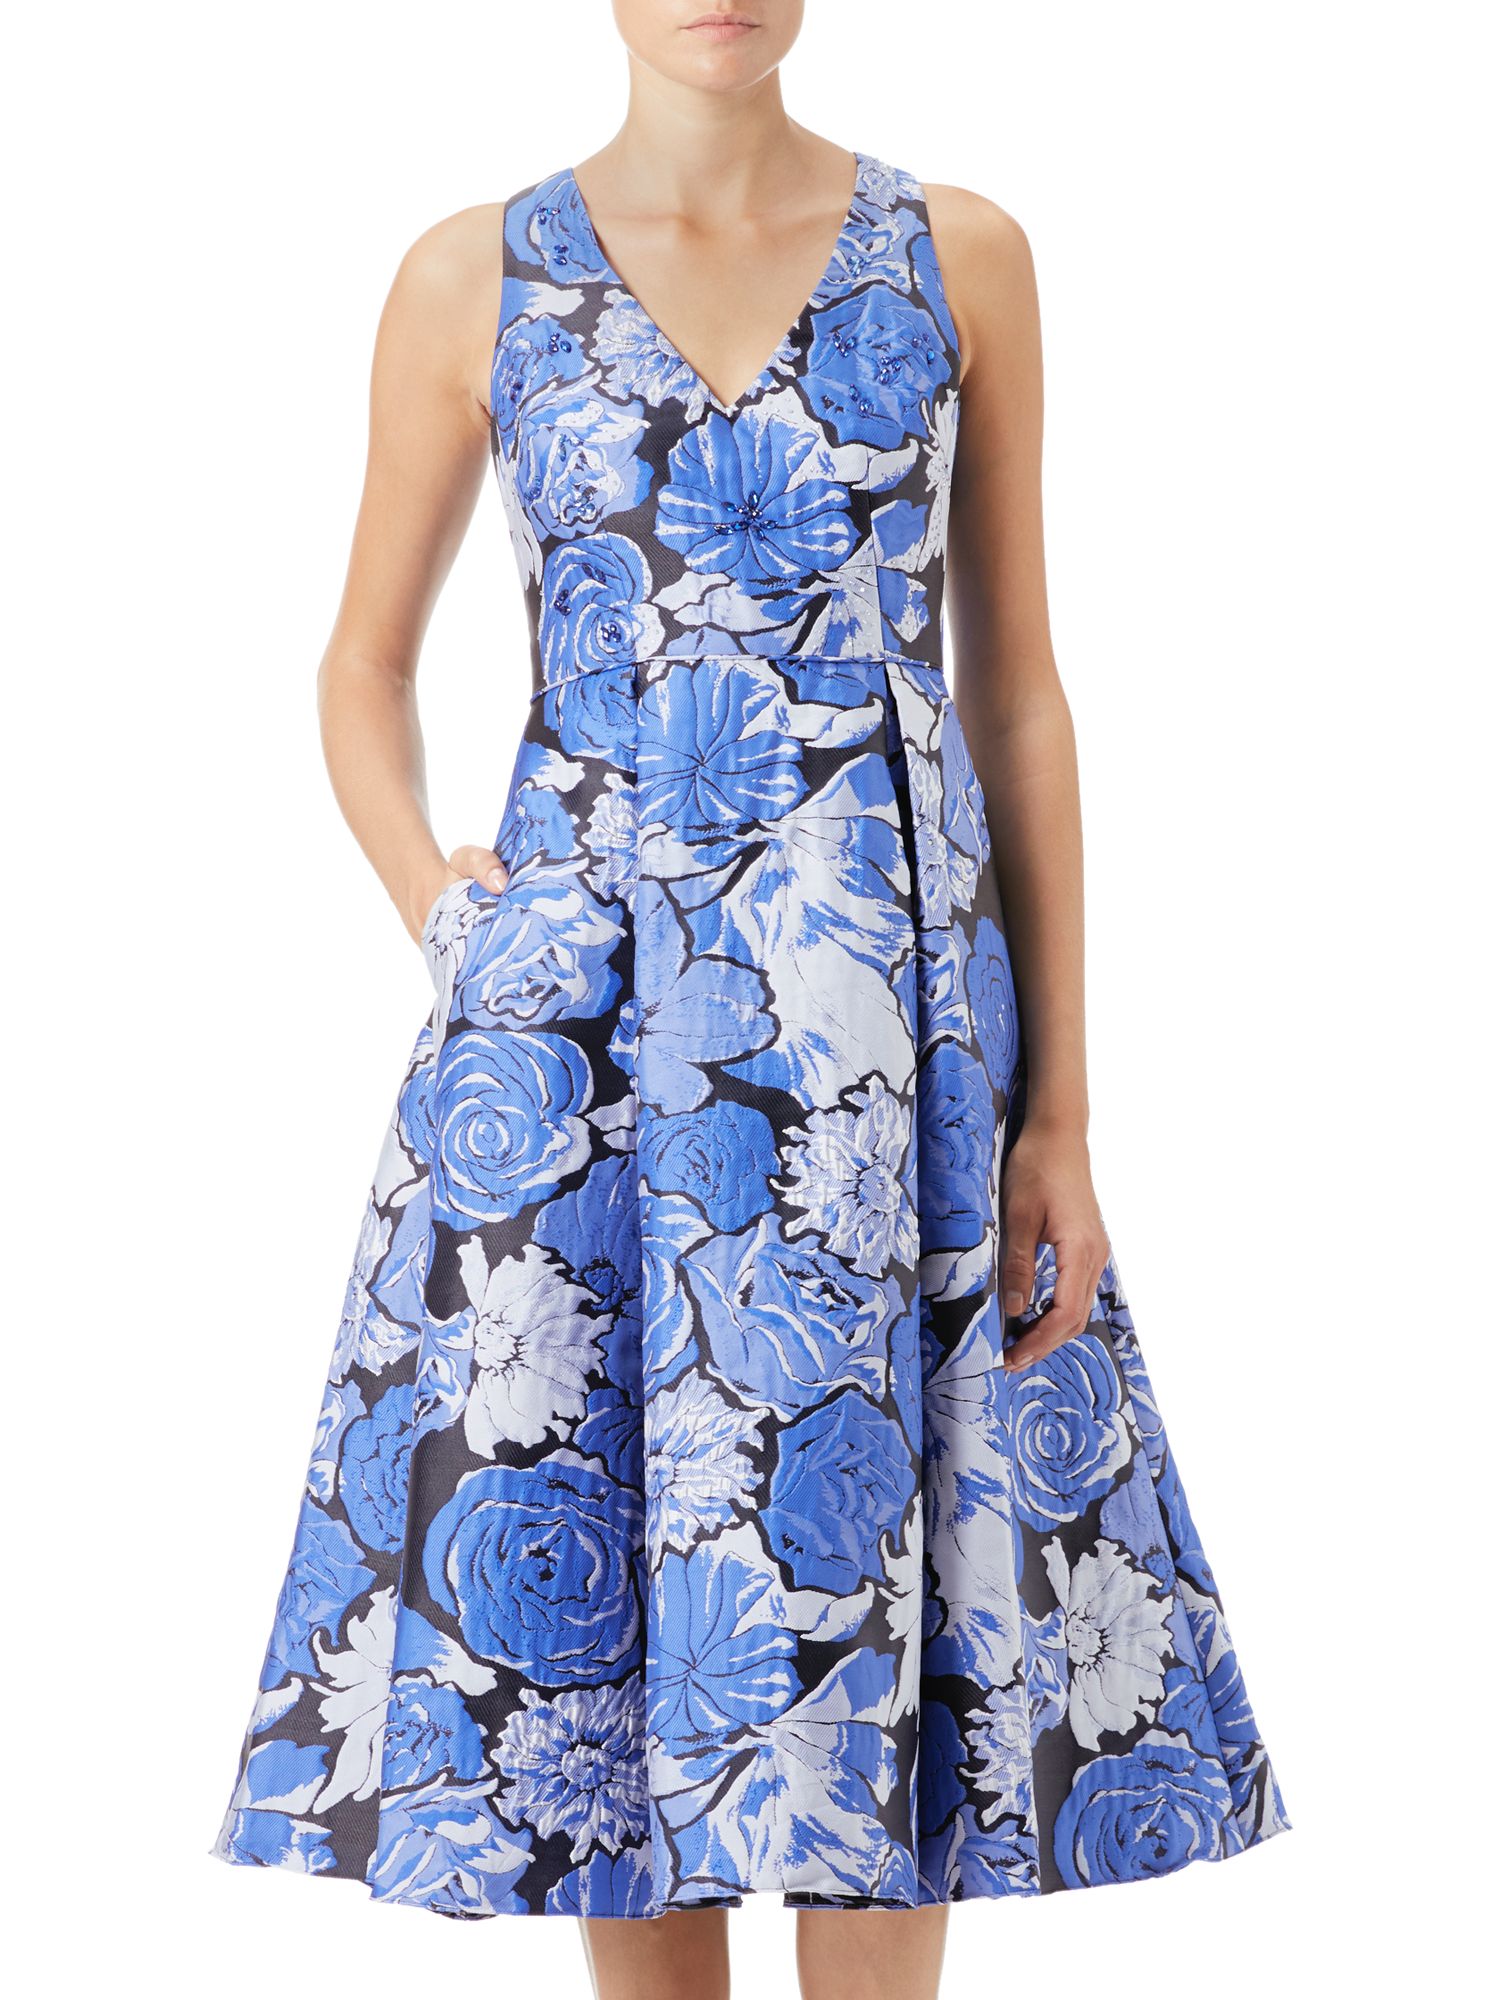 Adrianna Papell Floral Jacquard Fit and Flare Dress, Blue at John Lewis & Partners